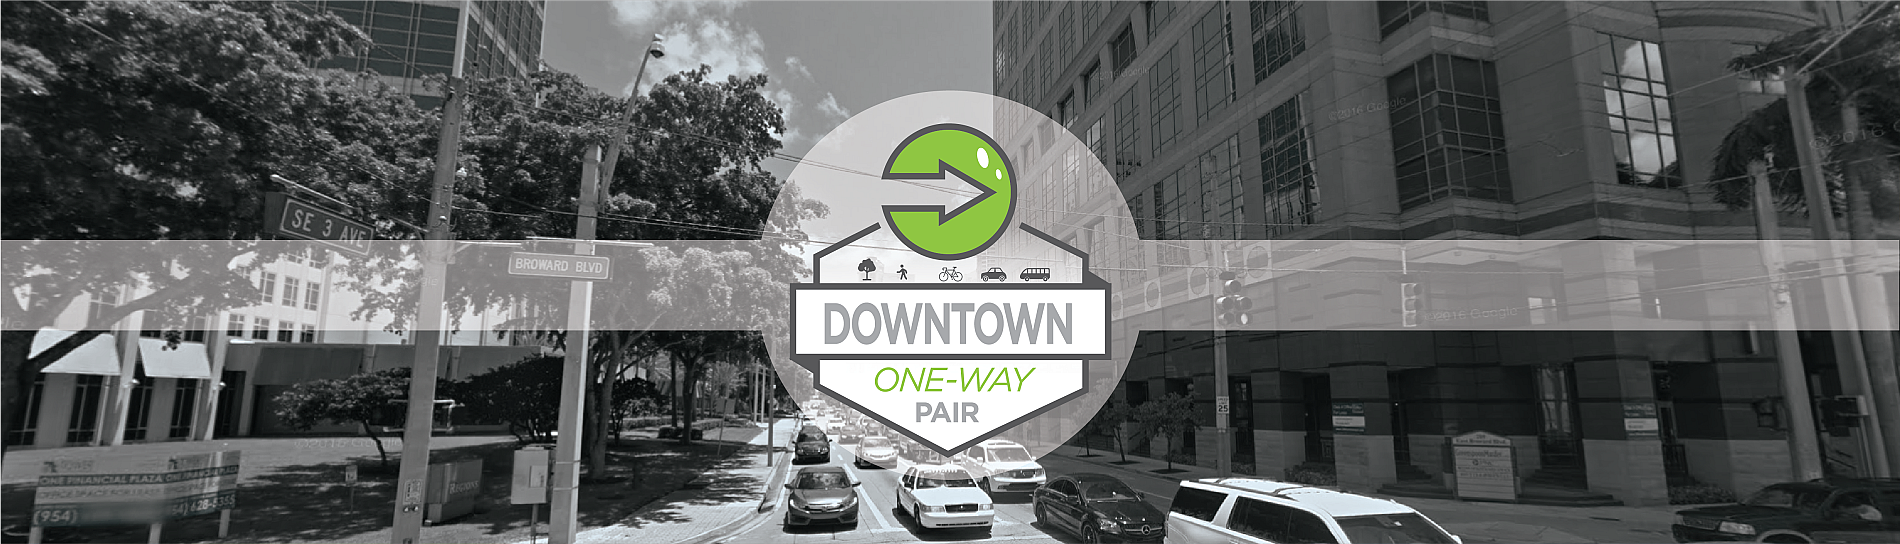 Downtown Oneway Pair Banner